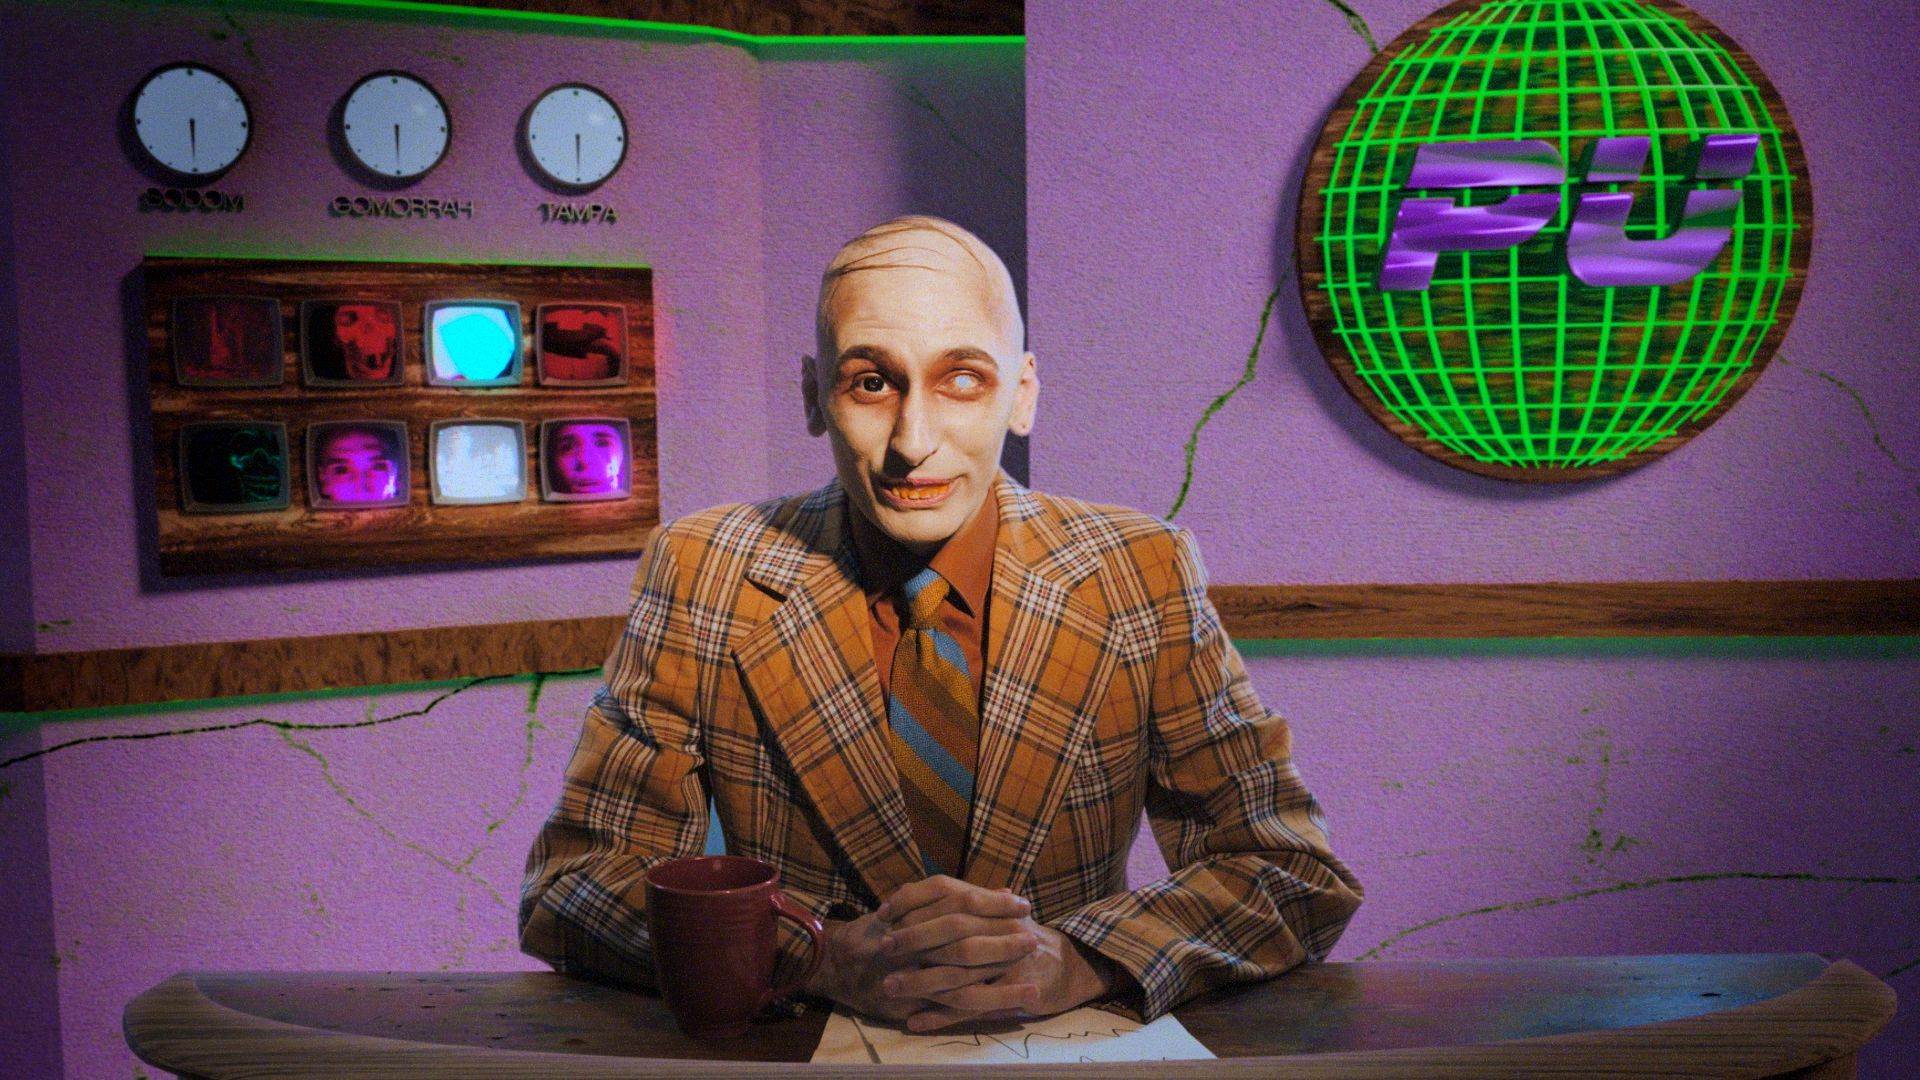 A TV news anchor in an orange plaid suit with one eye sits at a desk with his hands folded